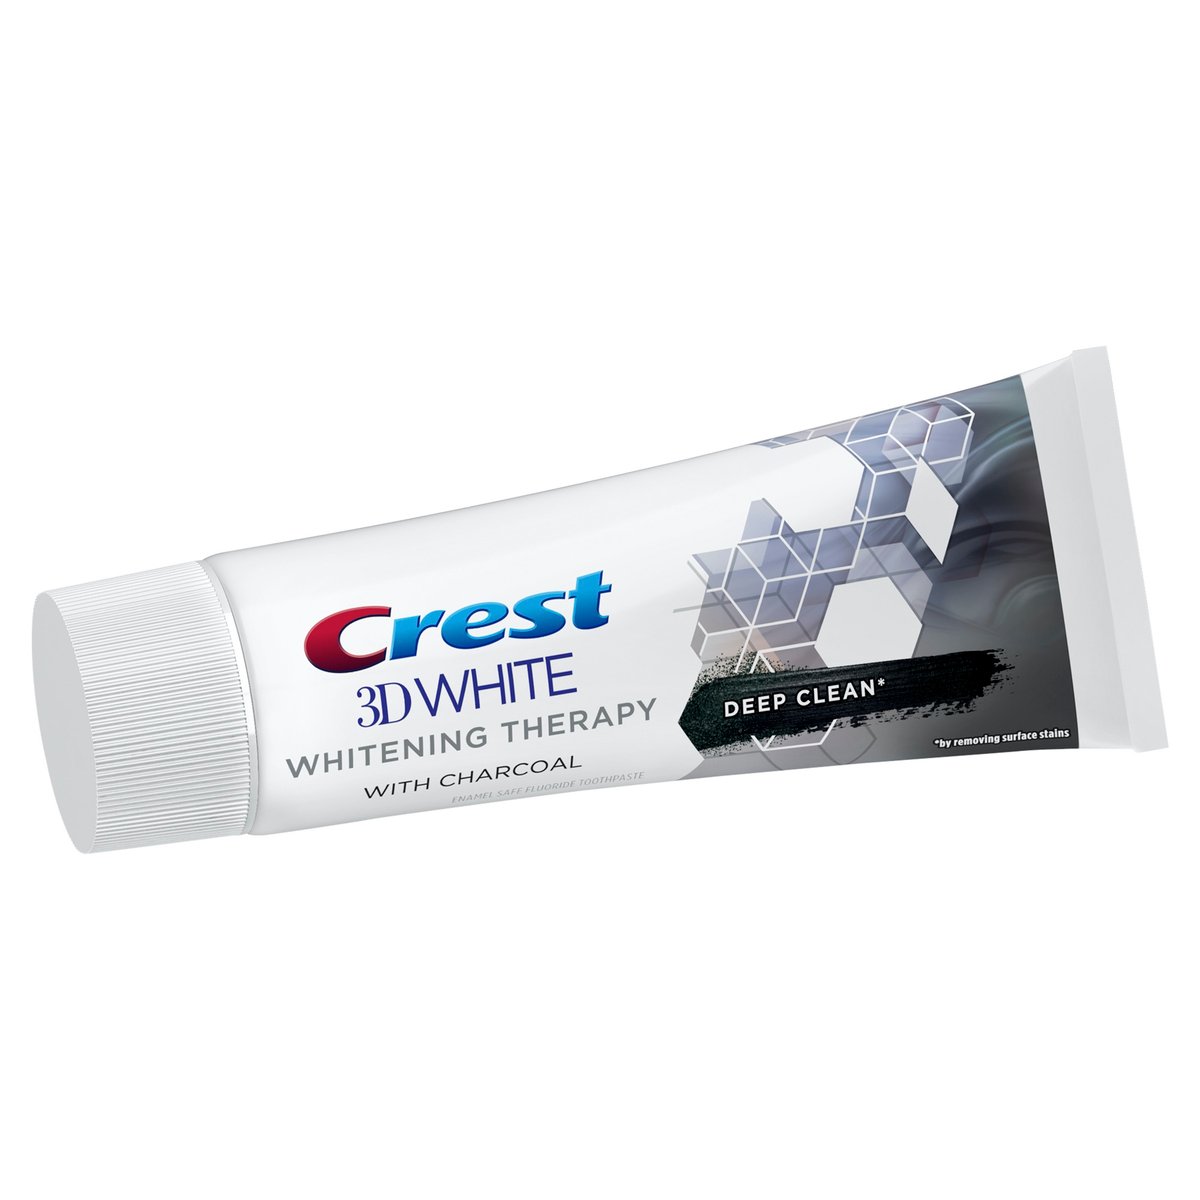 Crest 3D White Whitening Therapy With Charcoal Toothpaste 75 ml